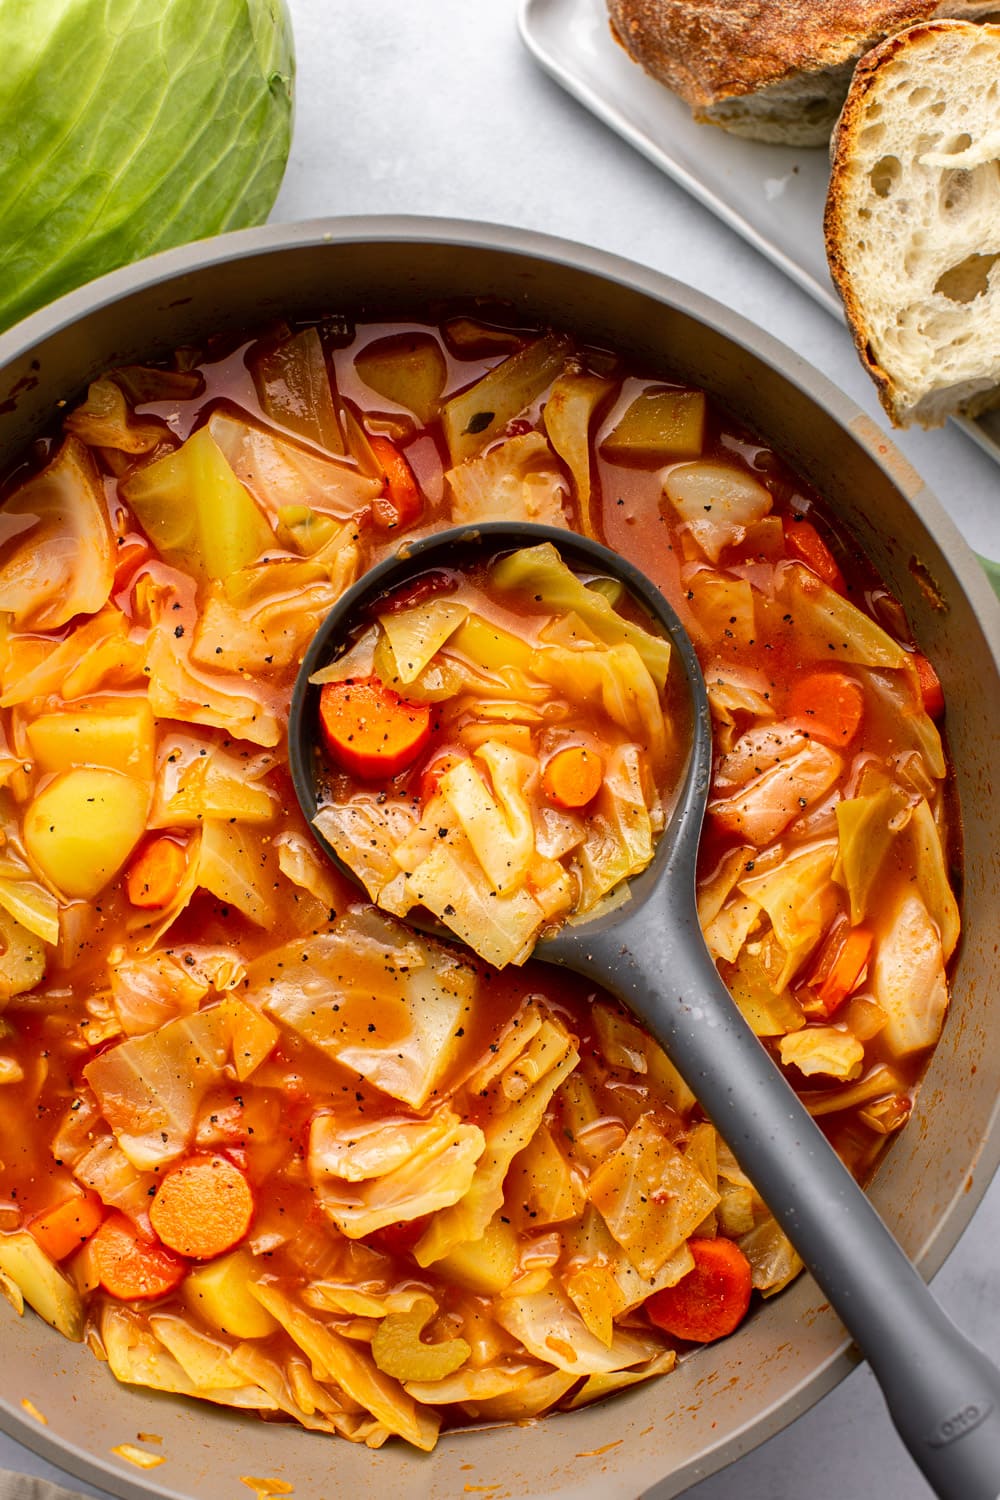 a zoomed in image of the hearty cabbage soup with a serving spoon scooping up a portion